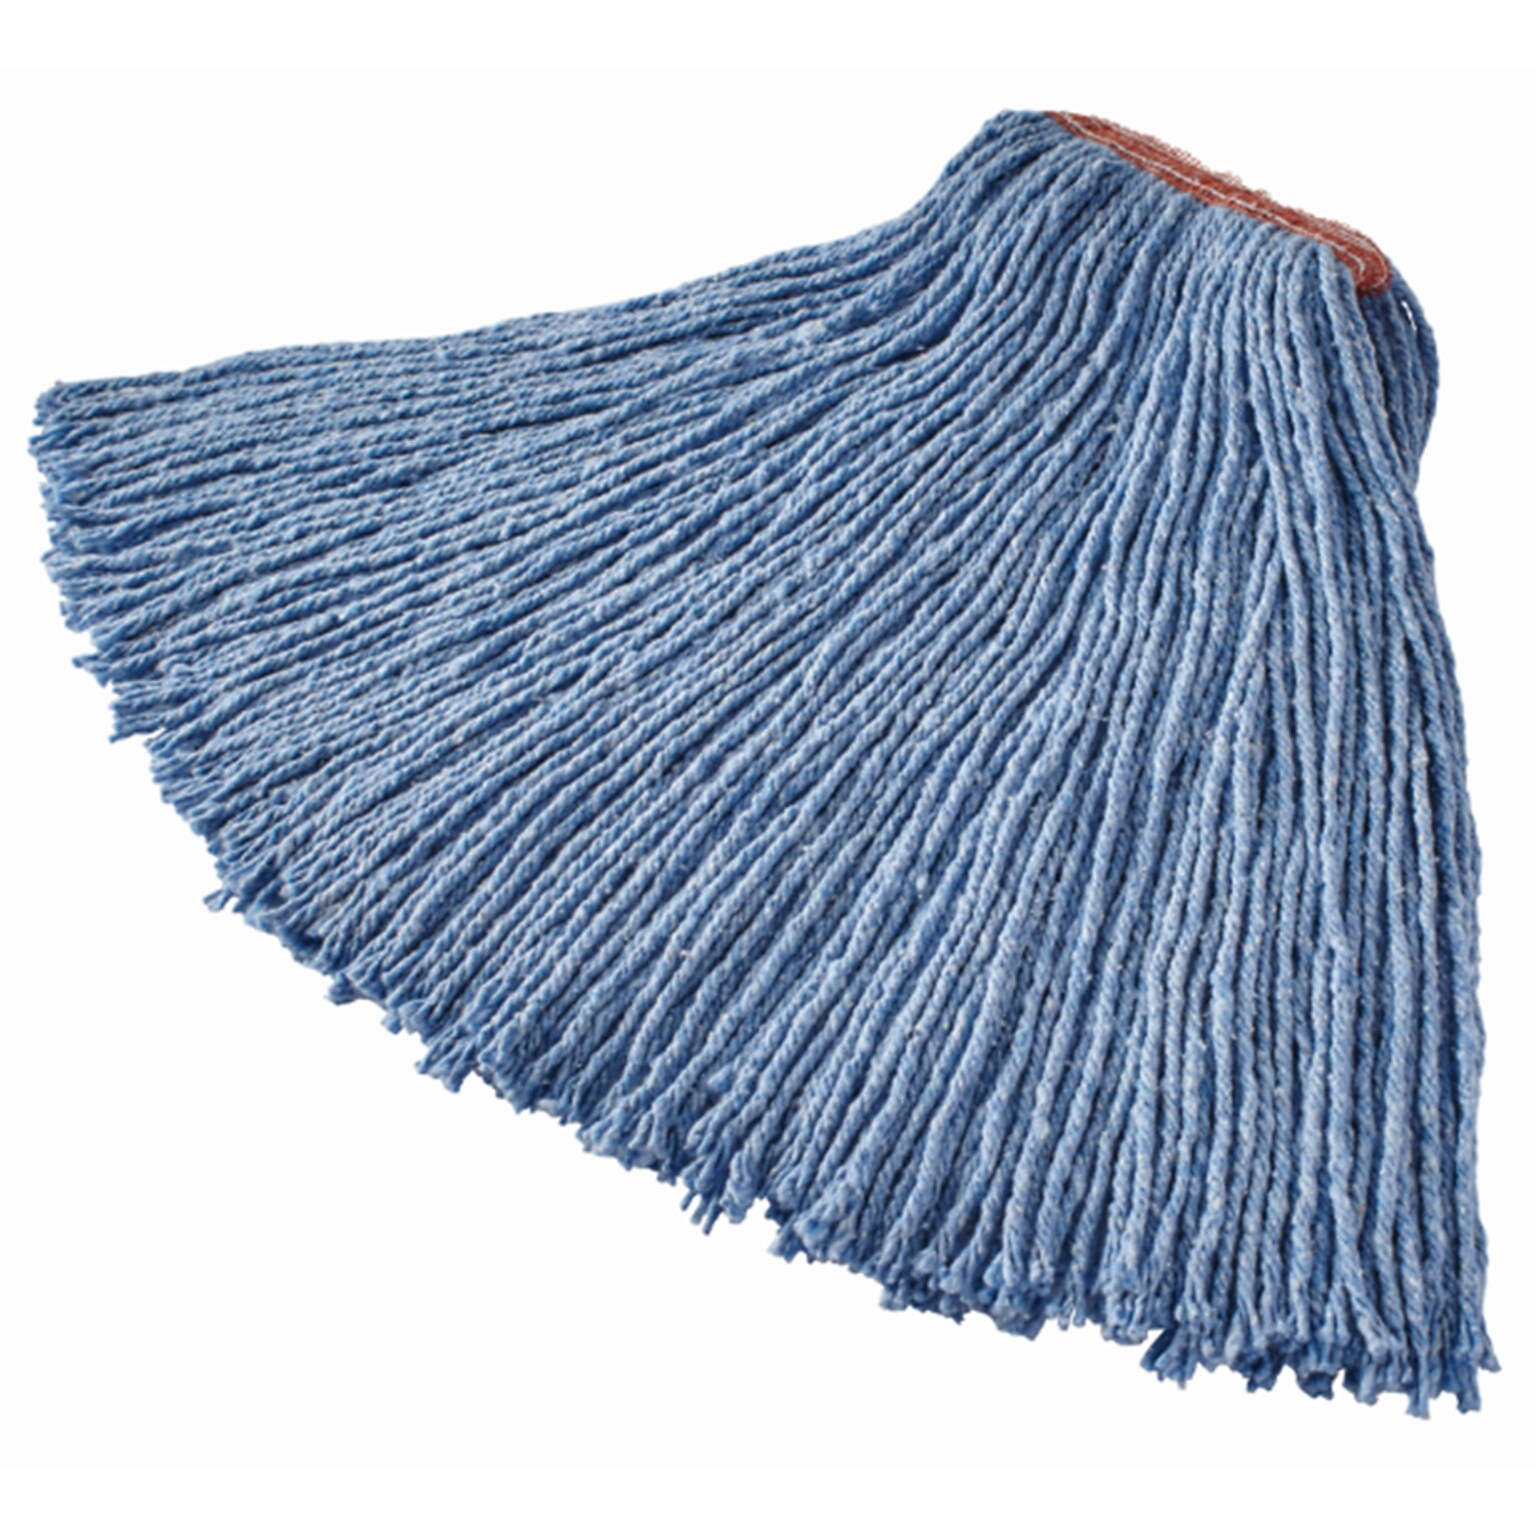 Rubbermaid Commercial Products 20 oz. Dura Pro Blend Wet Mop, 1 Headband, Blue (FGF51700BL00)